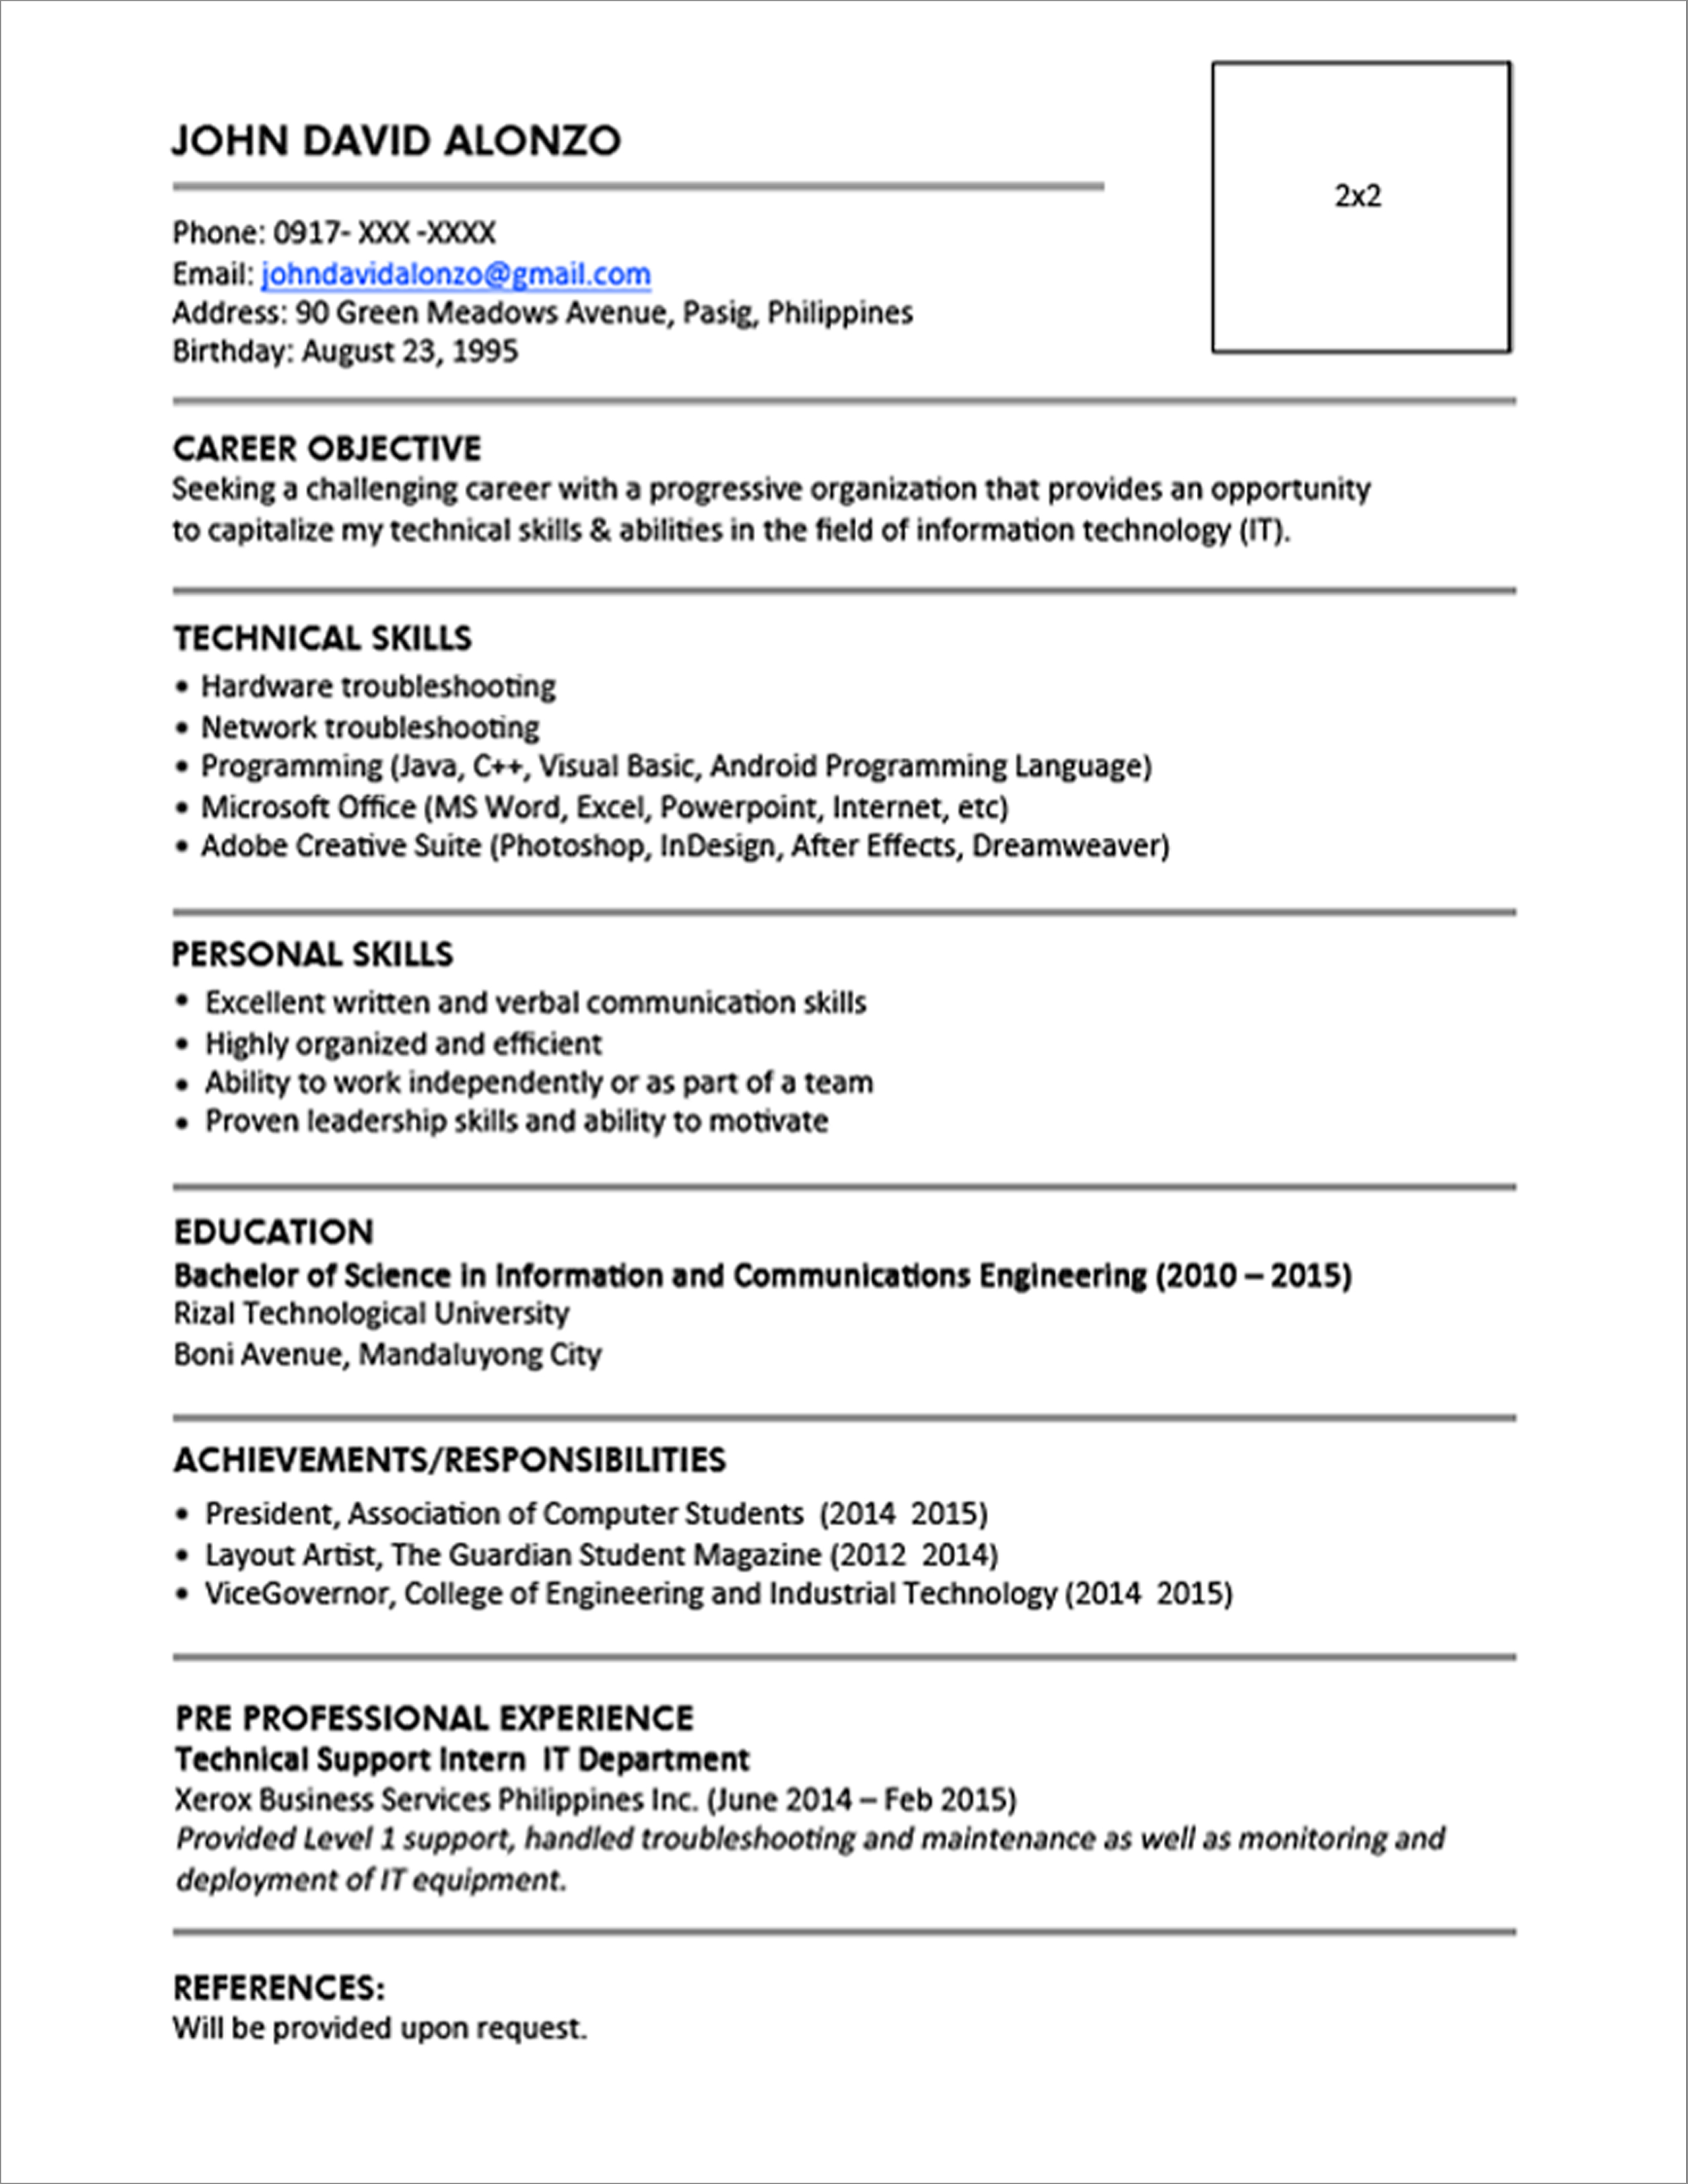 Example Of Resume Resume Templates You Can Download Jobstreet Philippines